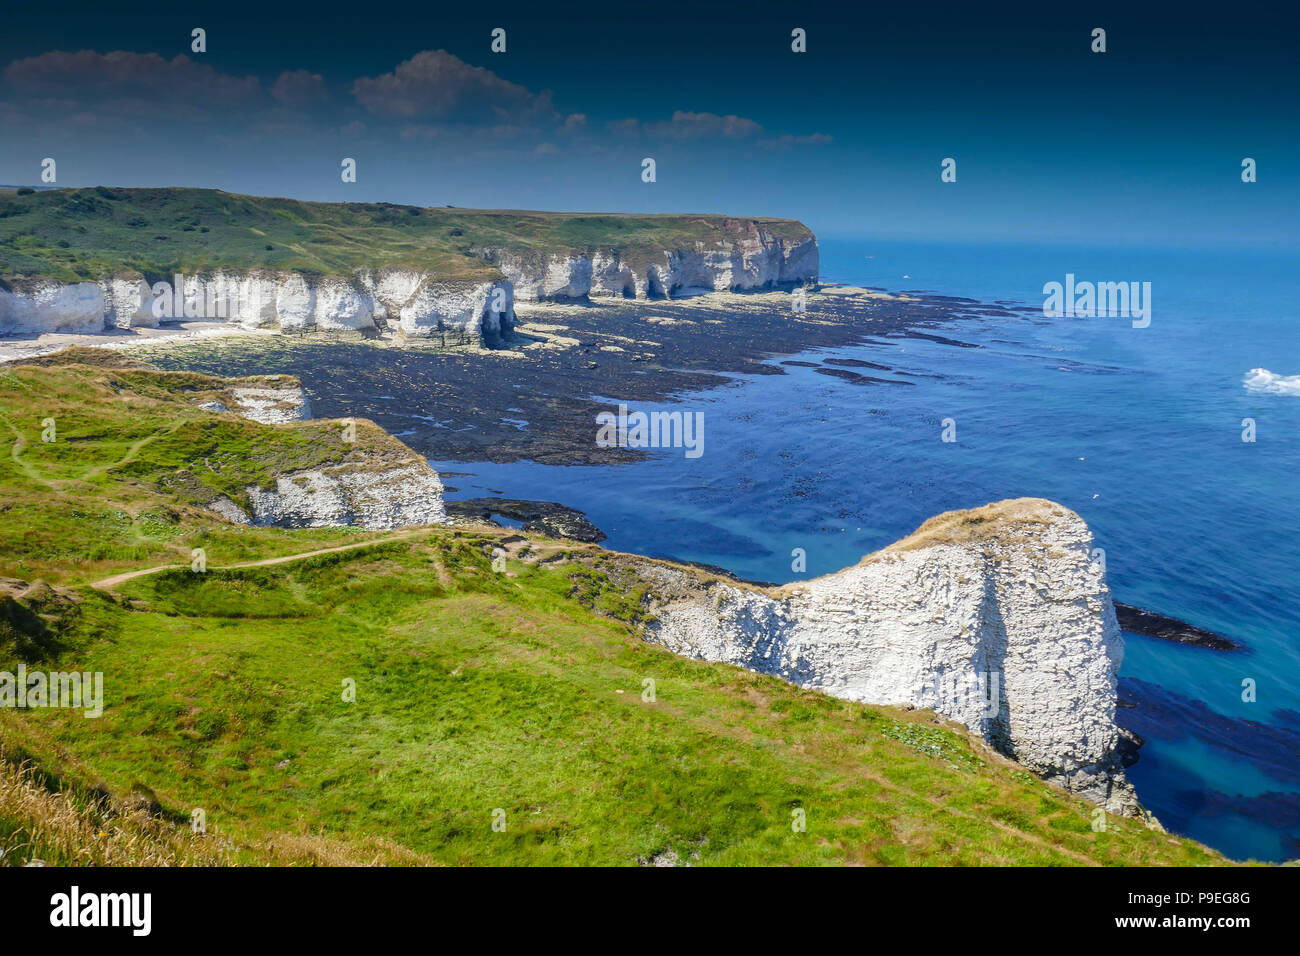 Summer weather and low tide at Flamborough Head, Easy Yorkshire Stock Photo